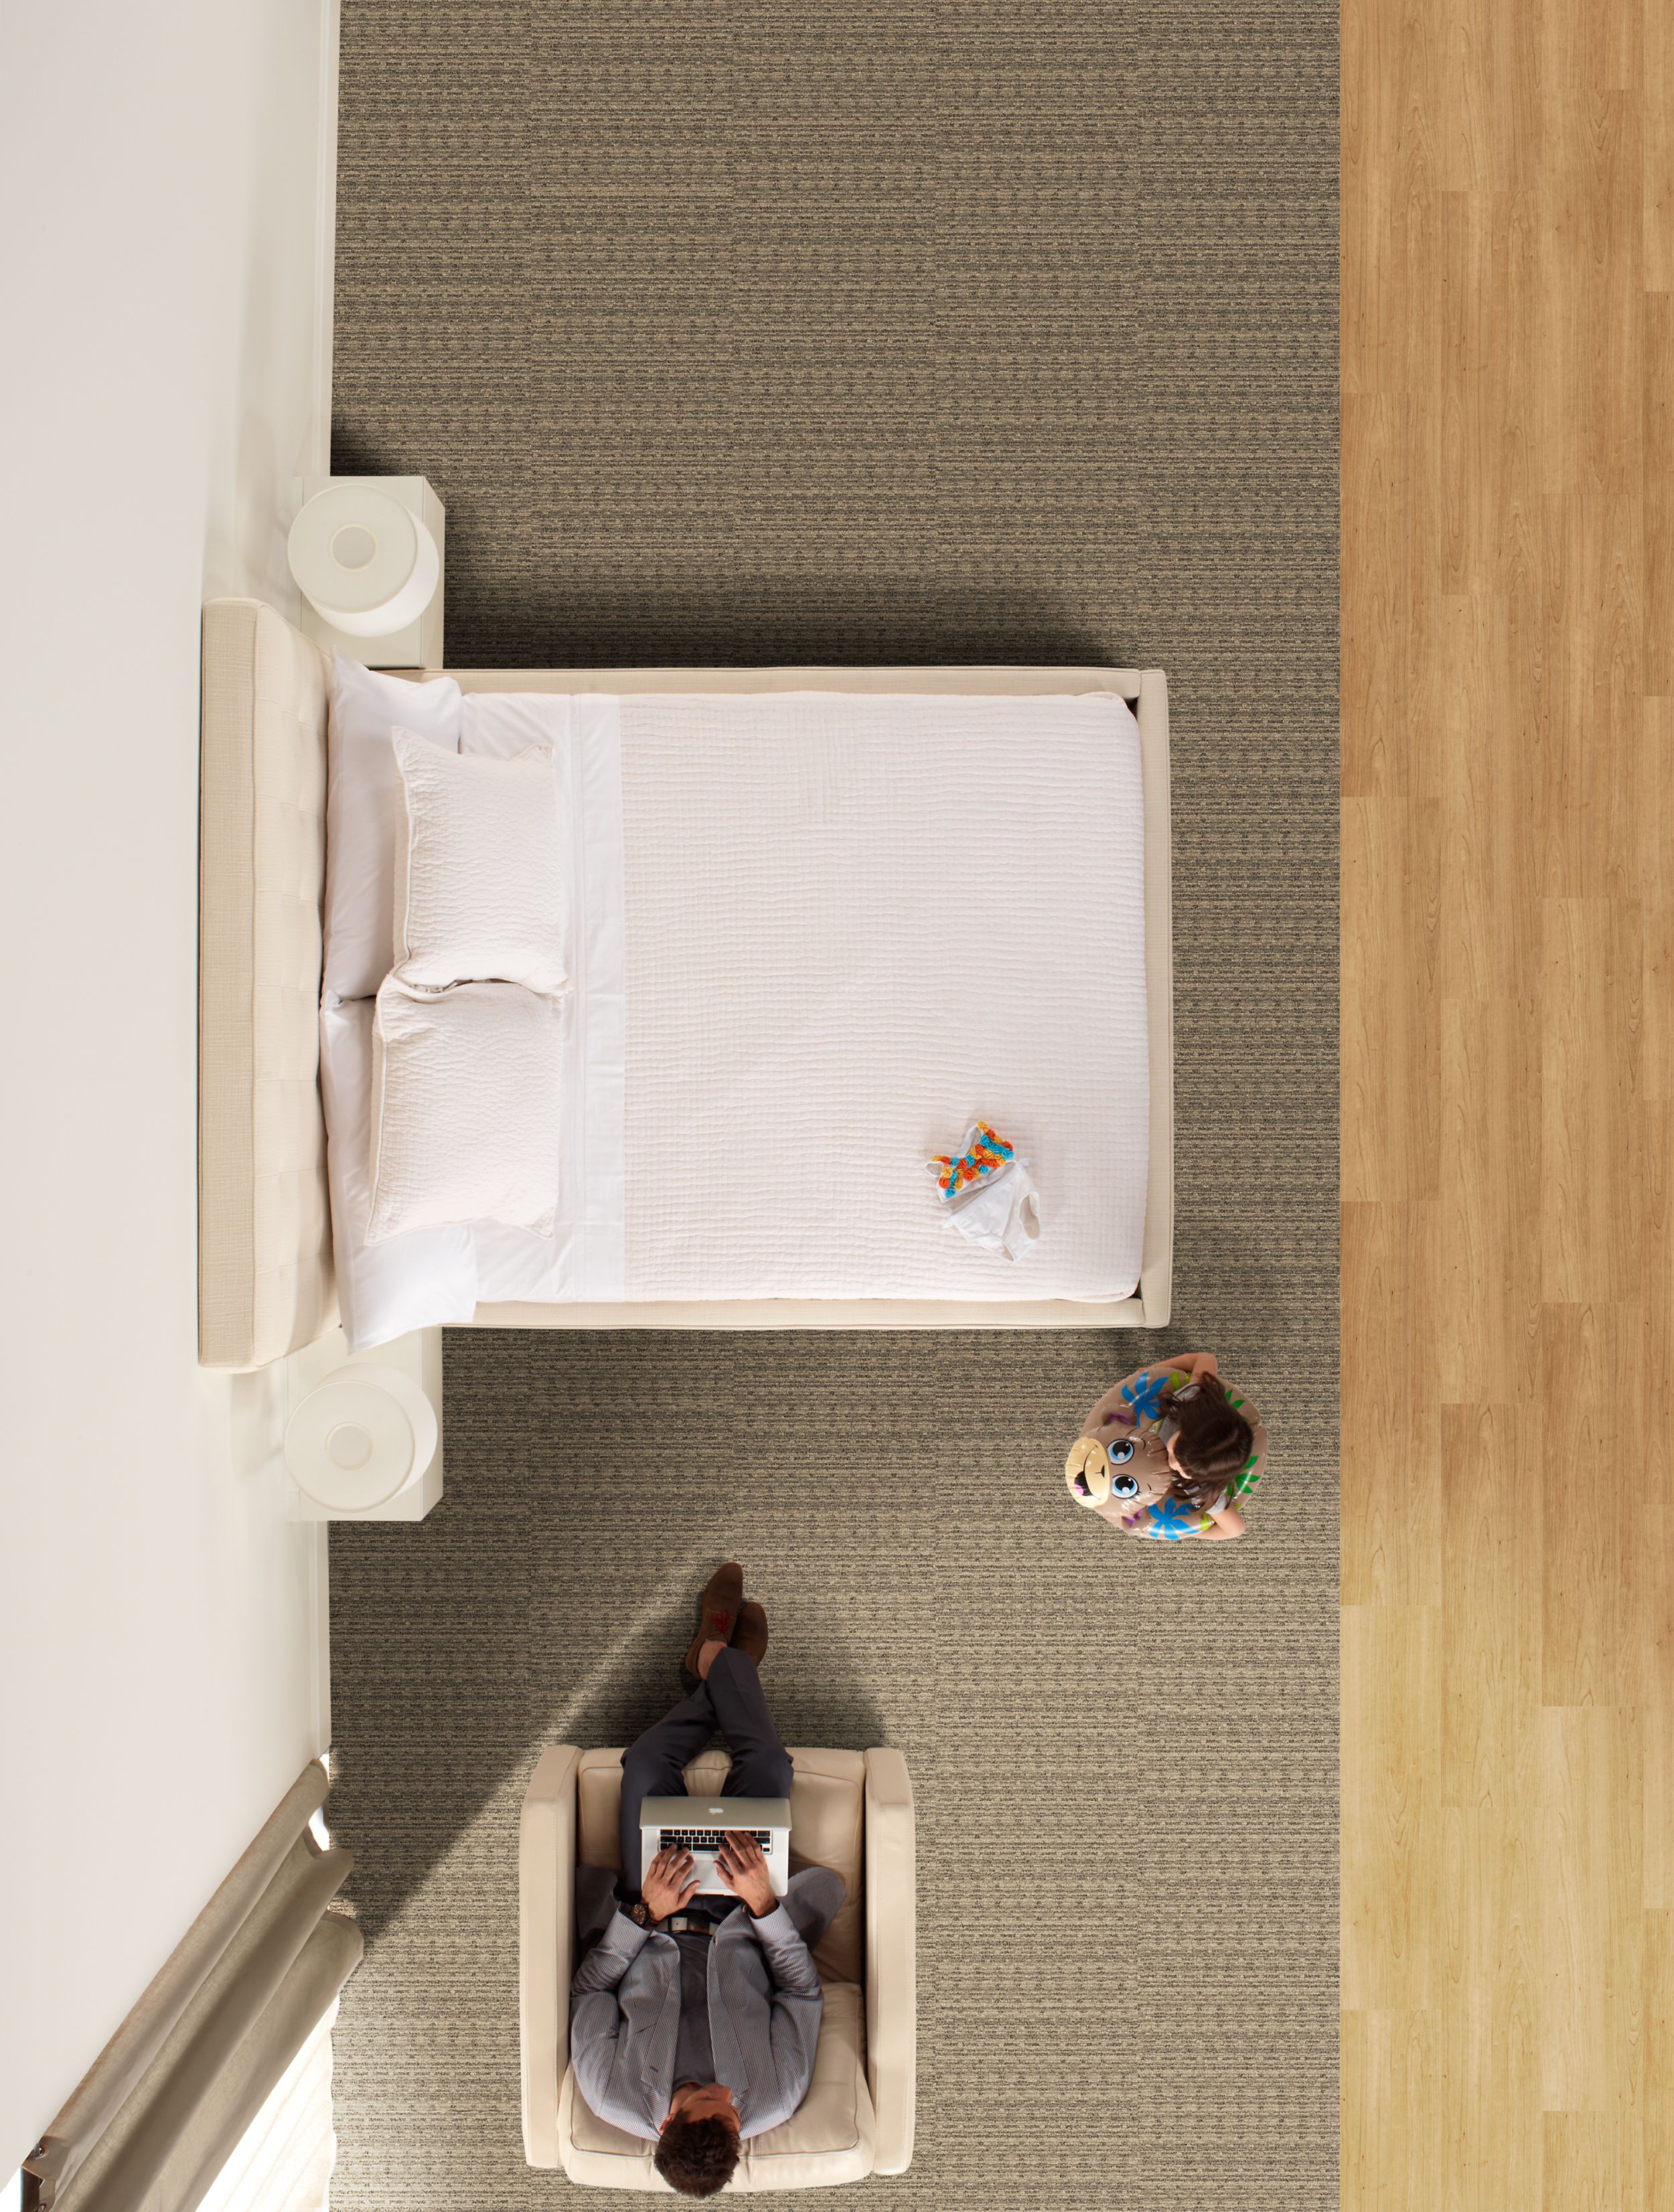 Interface RMS 102 carpet tile and Natural Woodgrains LVT in hotel guest room imagen número 4